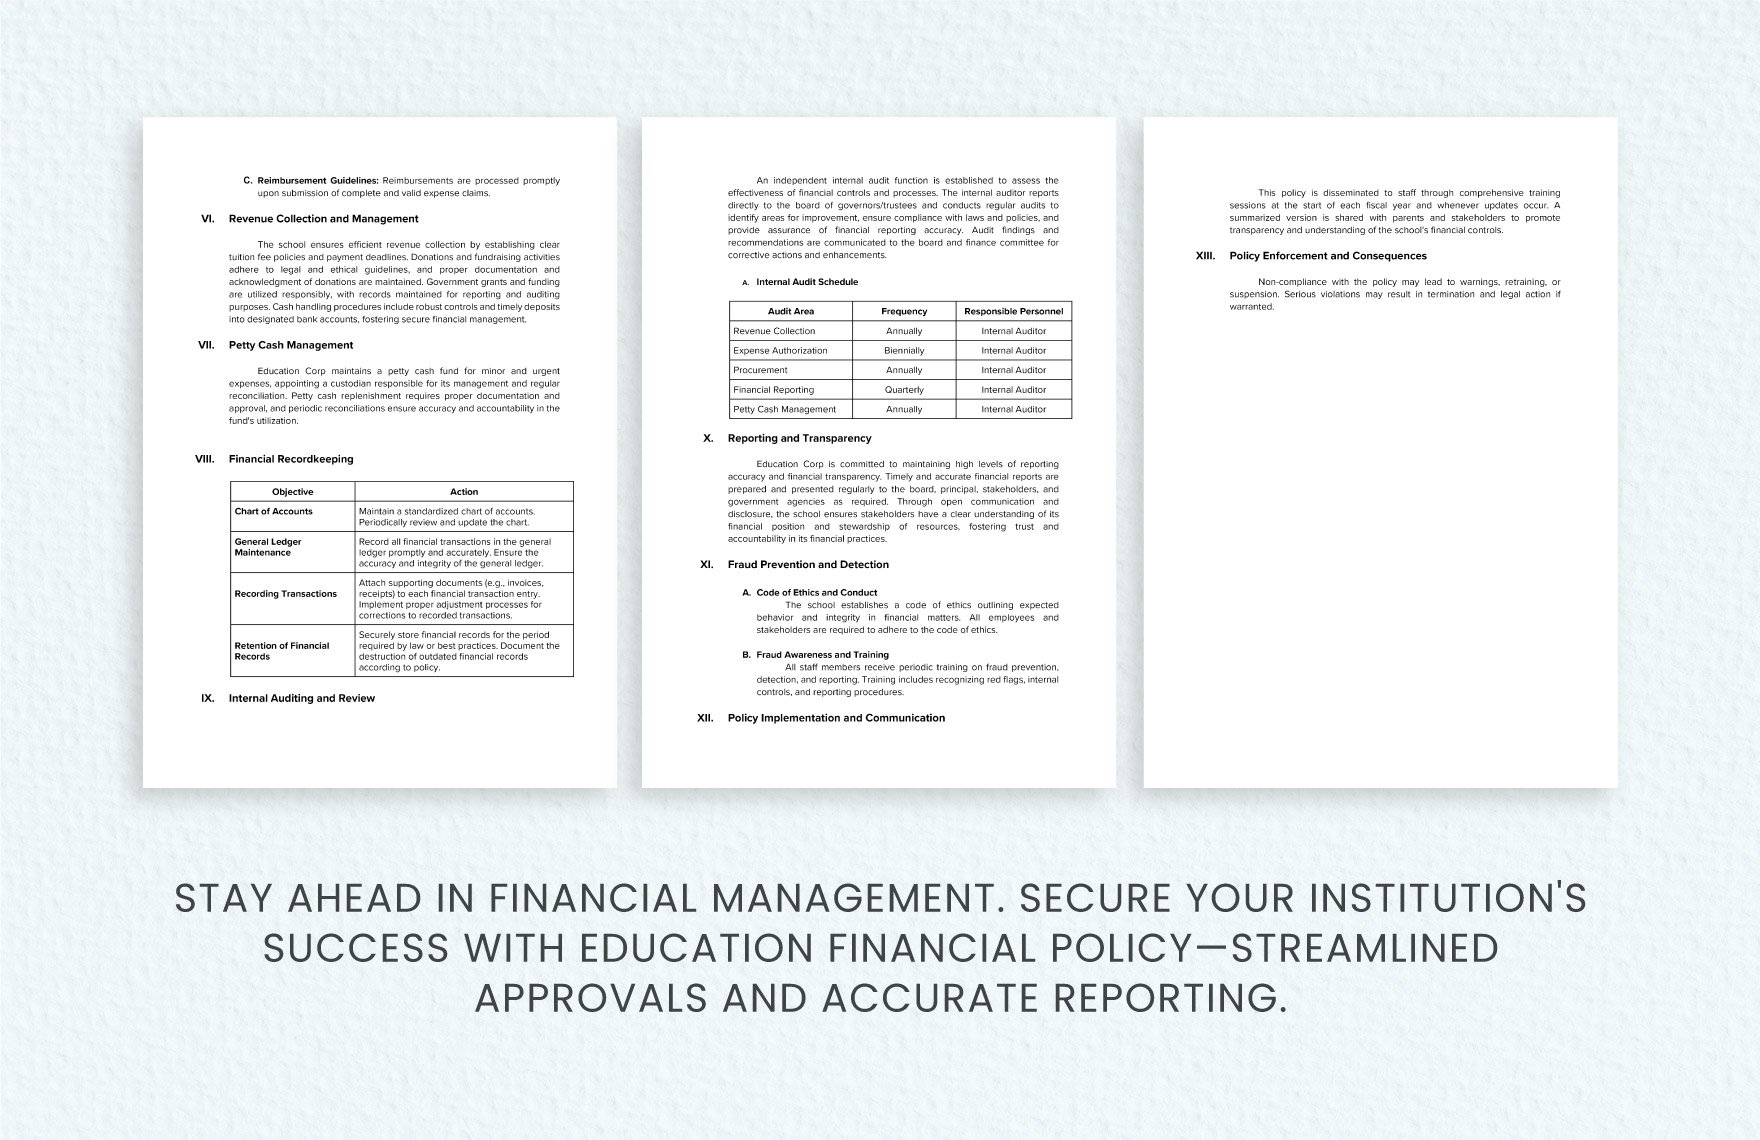 School Financial Controls Policy Template